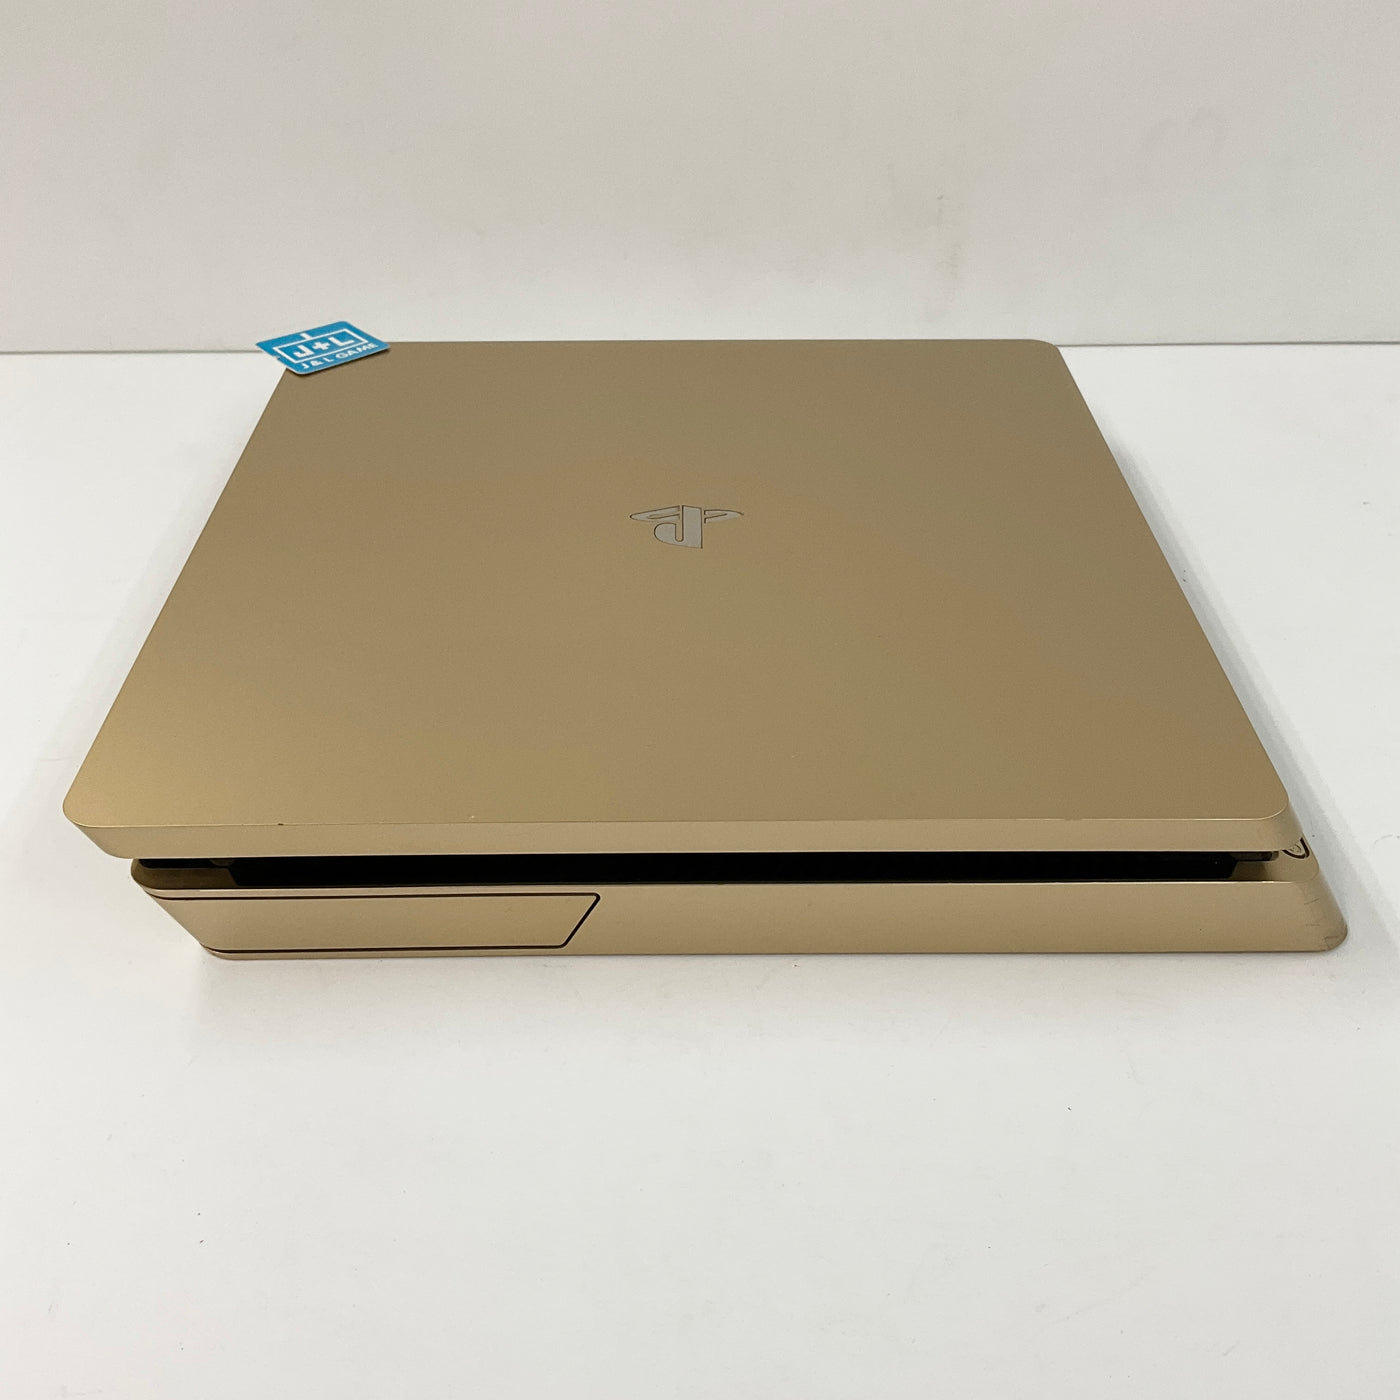 Sony PlayStation 4 - Limited Edition - game console - HDR - 1 TB HDD - gold  